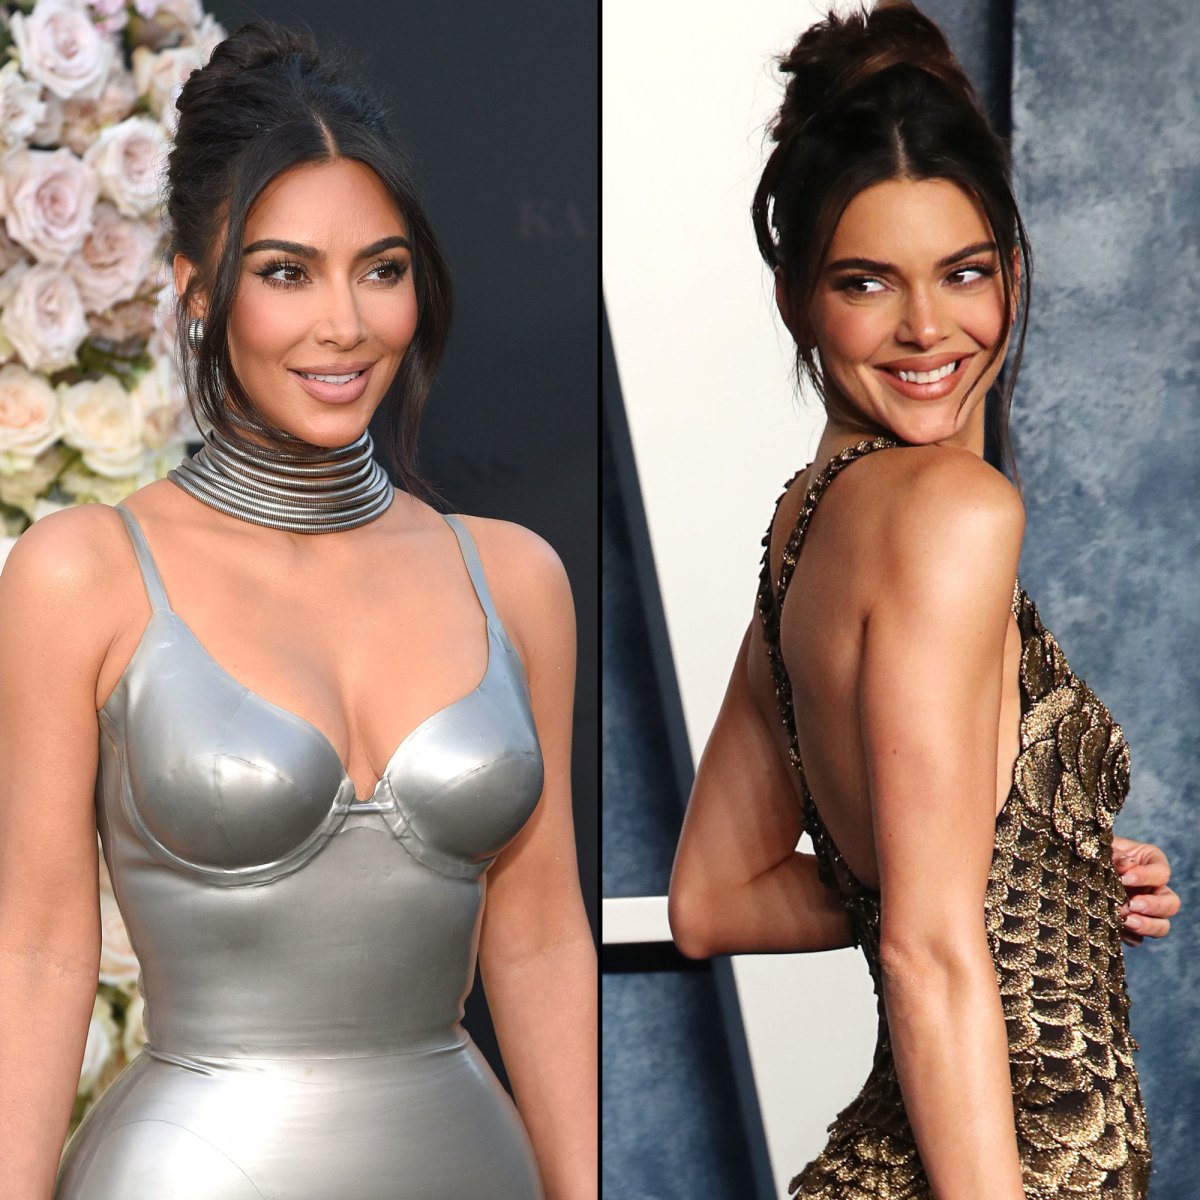 Why Kim Kardashian West and Kendall Jenner Love the Designer